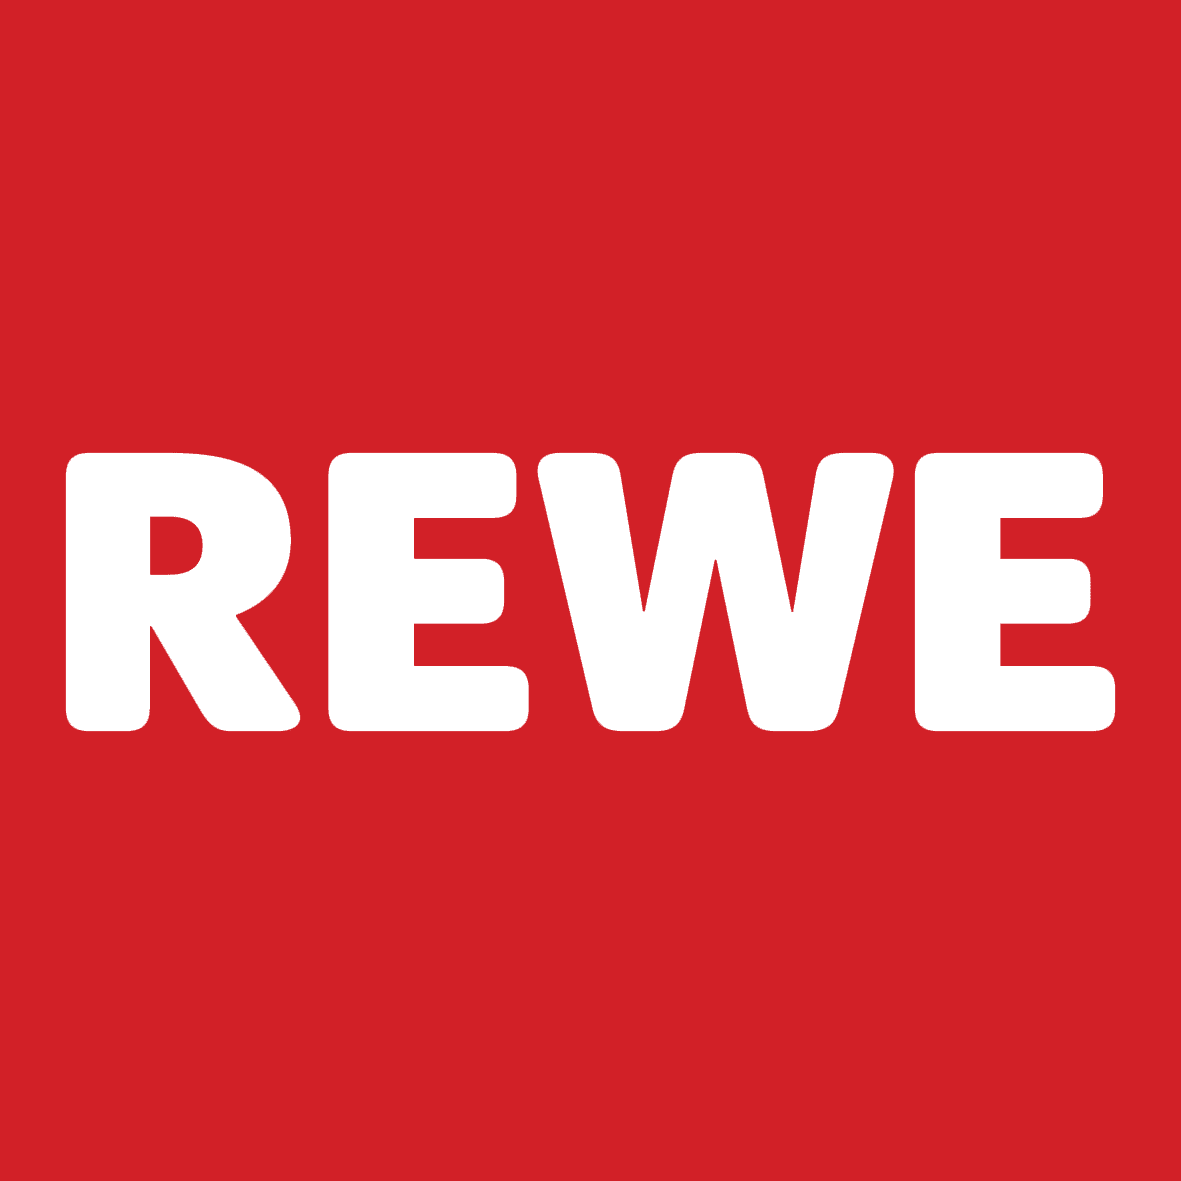 Rewe Logo Top 10 Online Grocery Stores in the World (April 29)